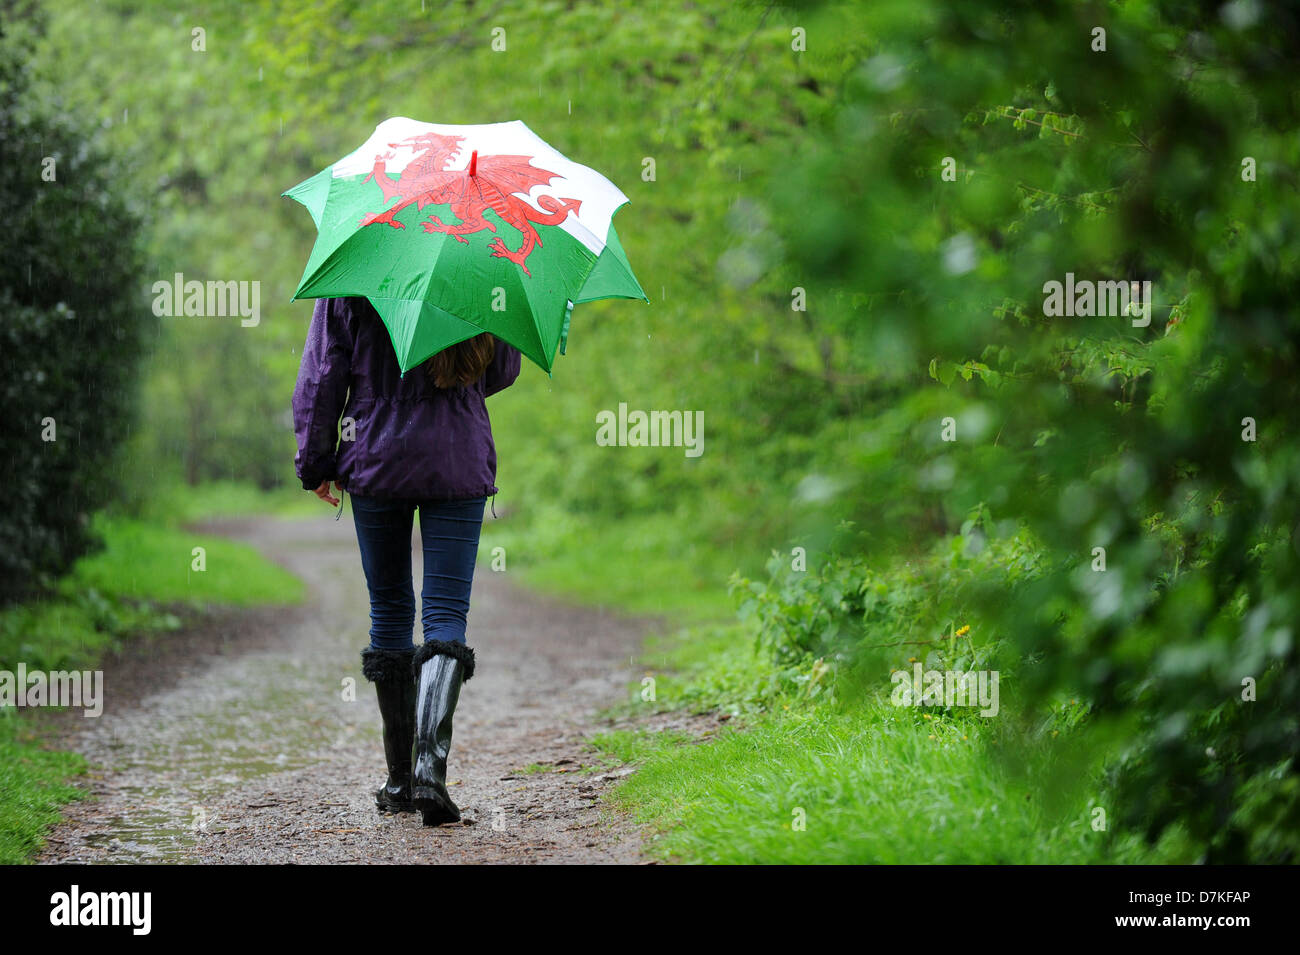 Cardiff, Wales, Uk. 9th May 2013.   A girl uses an umbrella to shelter from the rain in Rhiwbina, Cardiff. More wet weather has been forecast for the weekend. Credit: Matthew Horwood /Alamy Live News Stock Photo